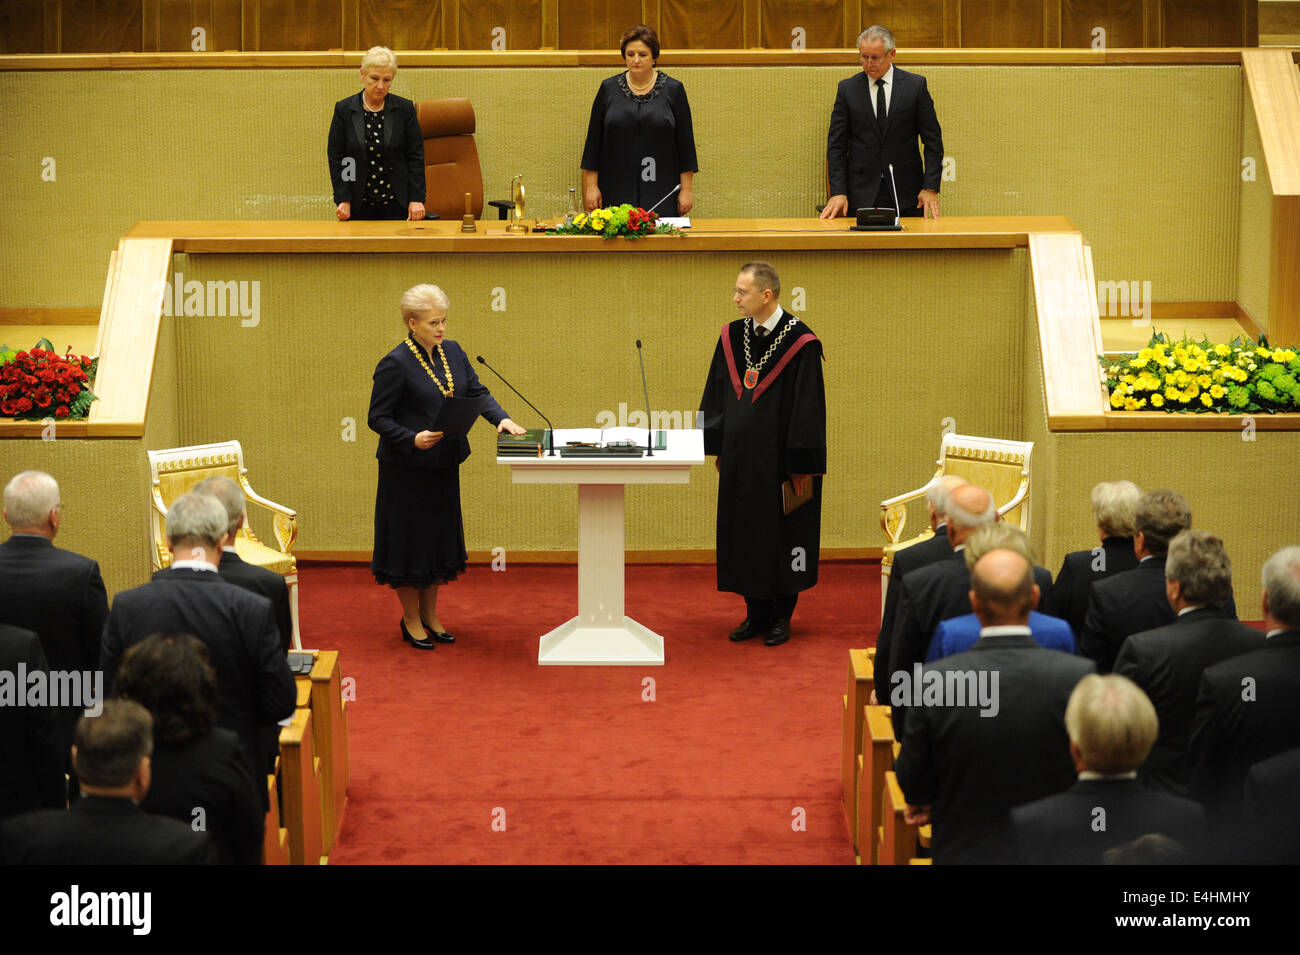 Vilnius, Lithuania. 12th July, 2014. Dalia Grybauskaite (L1) takes an oath on her inauguration of presidency in Vilnius, Lithuania, on July 12, 2014. Grybauskaite was reelected president of Lithuania in May with roughly 58 percent of supportive votes, making her the first president of the Baltic country to be consecutively elected. Credit:  Alfredas Pliadis/Xinhua/Alamy Live News Stock Photo